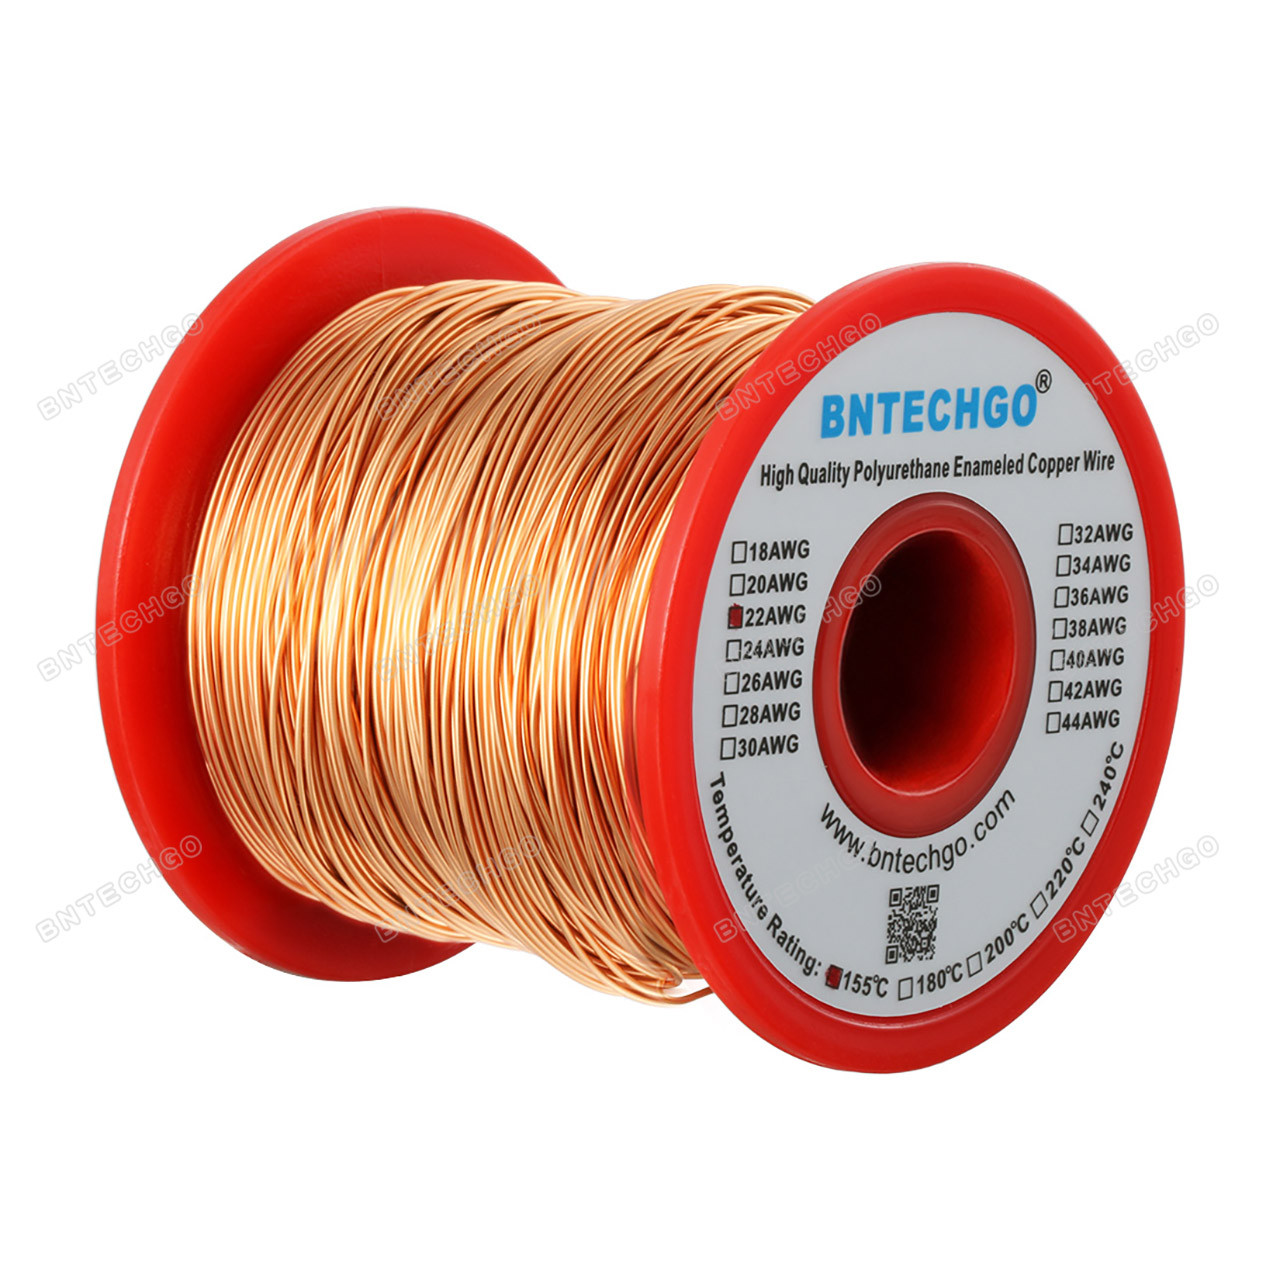 High quality and highly efficient 22 Gauge Enameled Magnet Wire